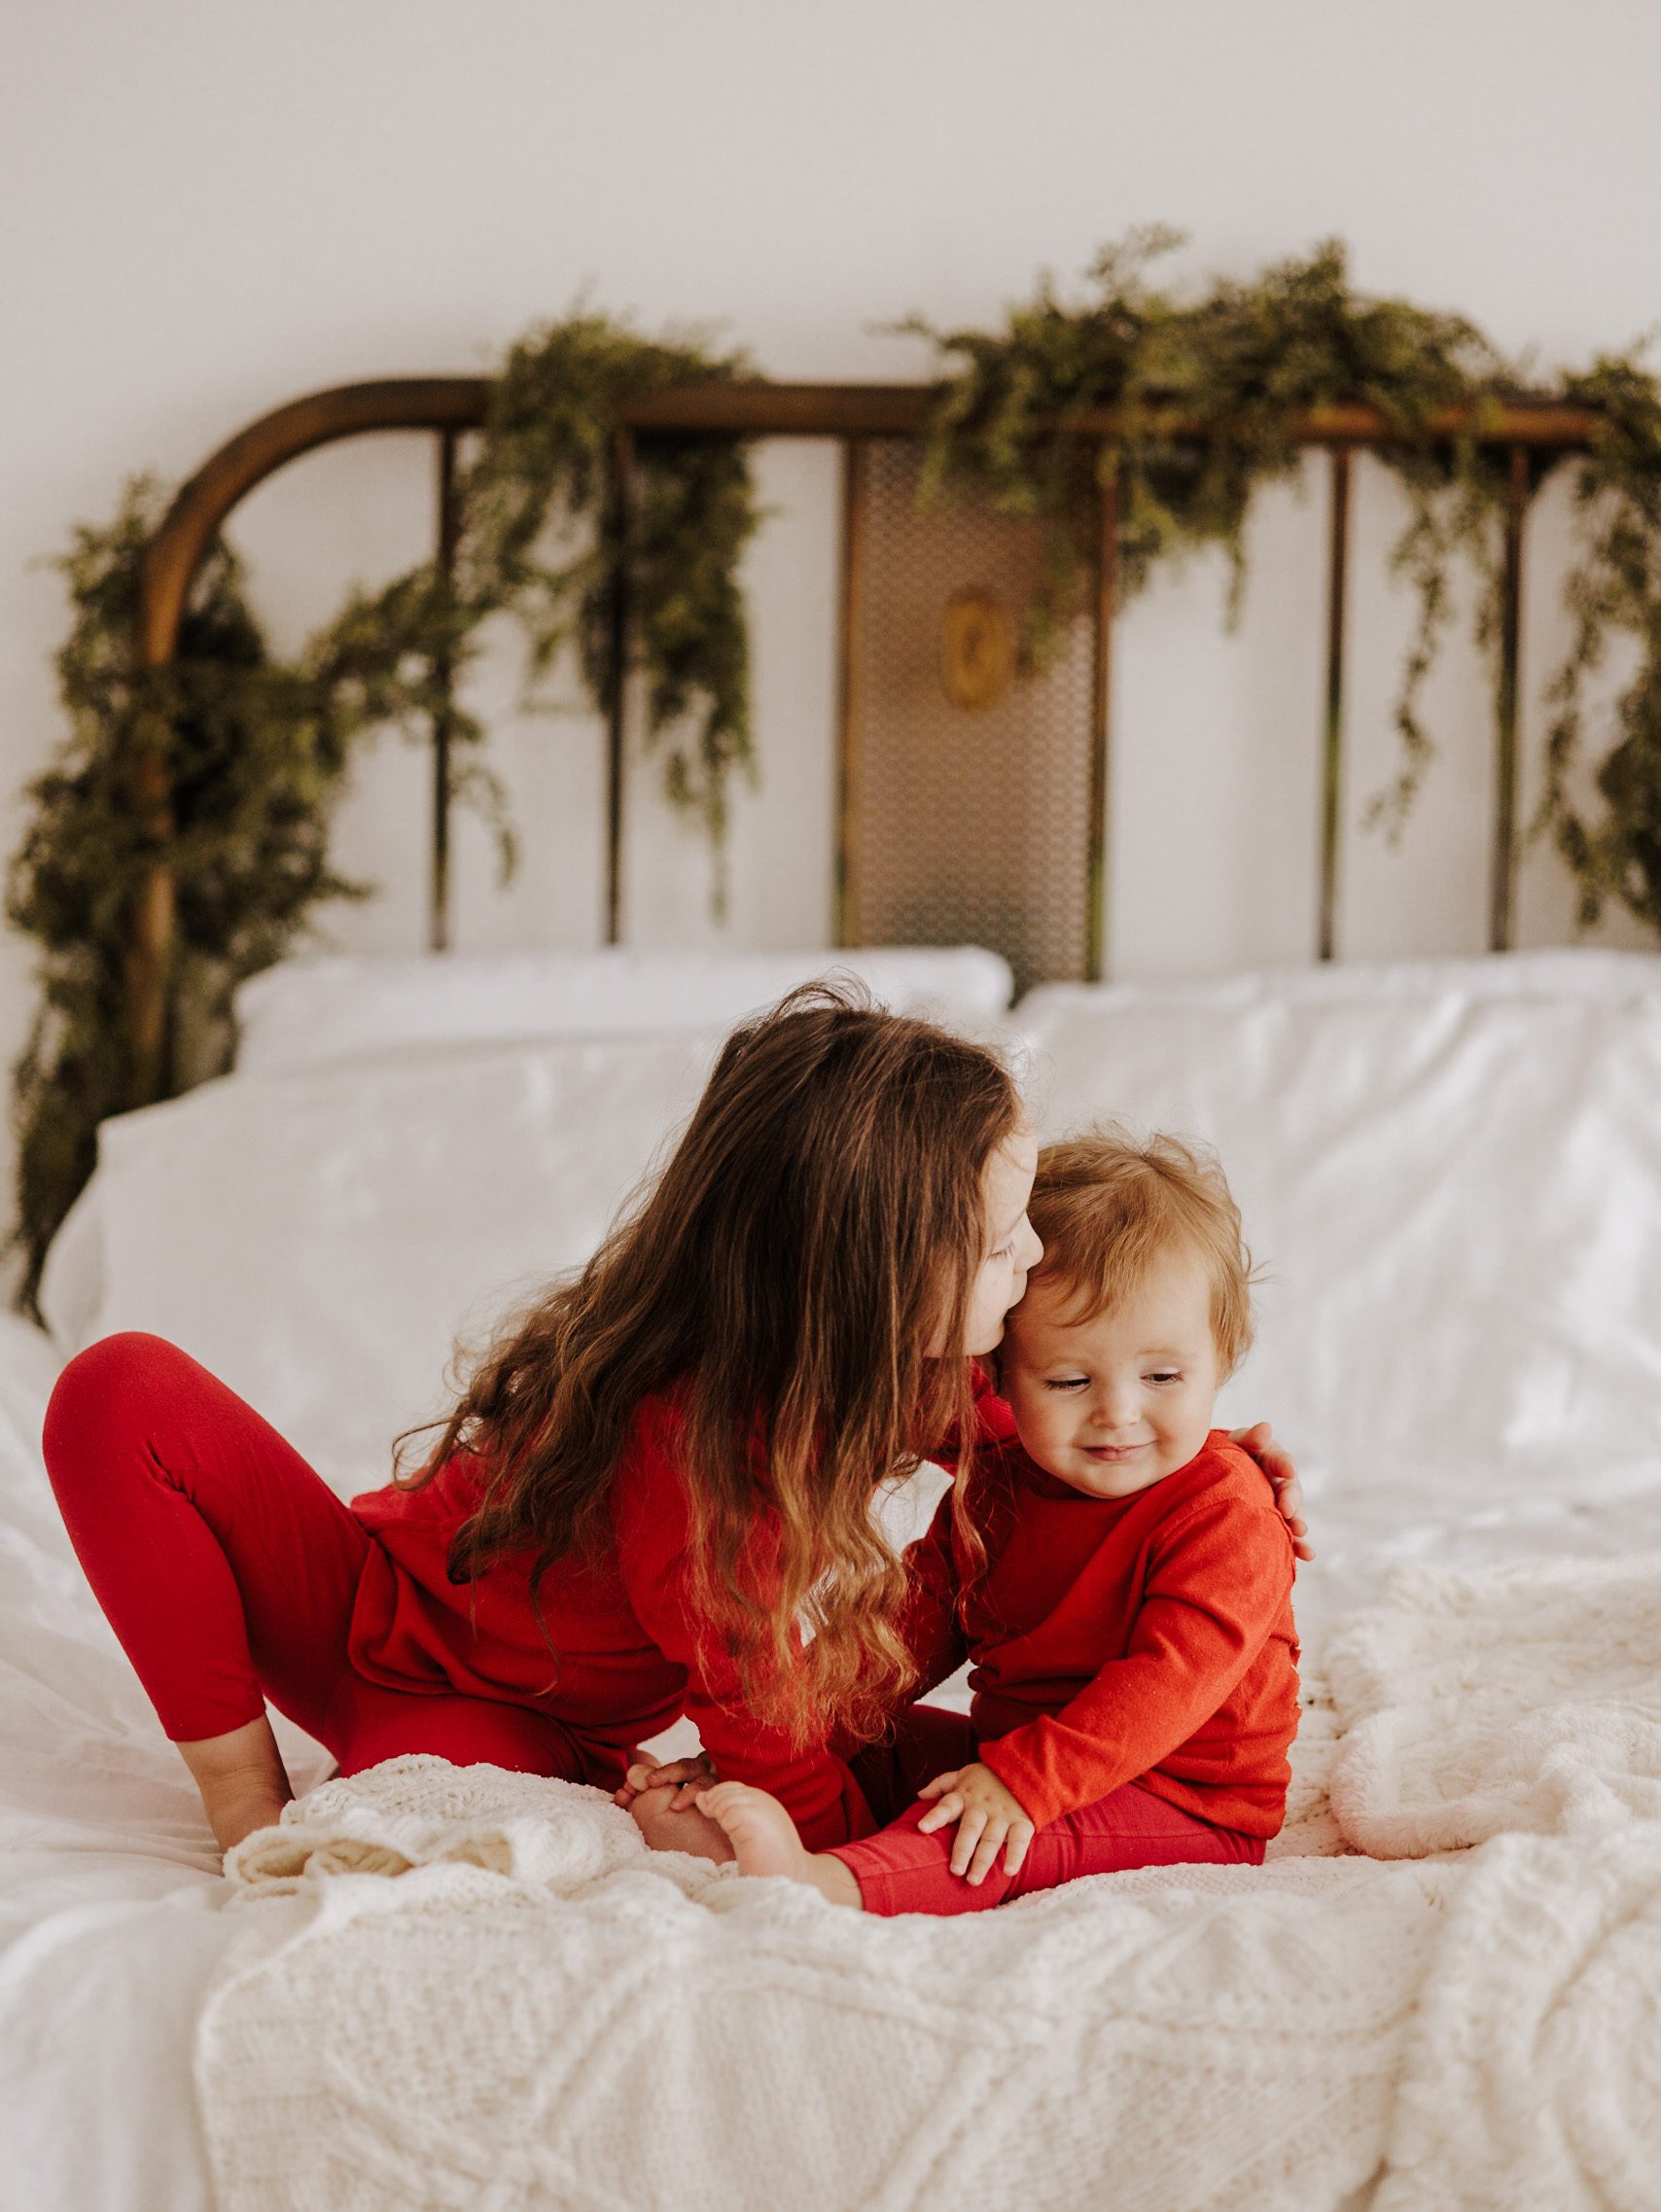 Big sister and little sister sitting on a vintage bed covered in greenery and a white bedspread. Holiday PJ Mini Sessions in Murfreesboro TN